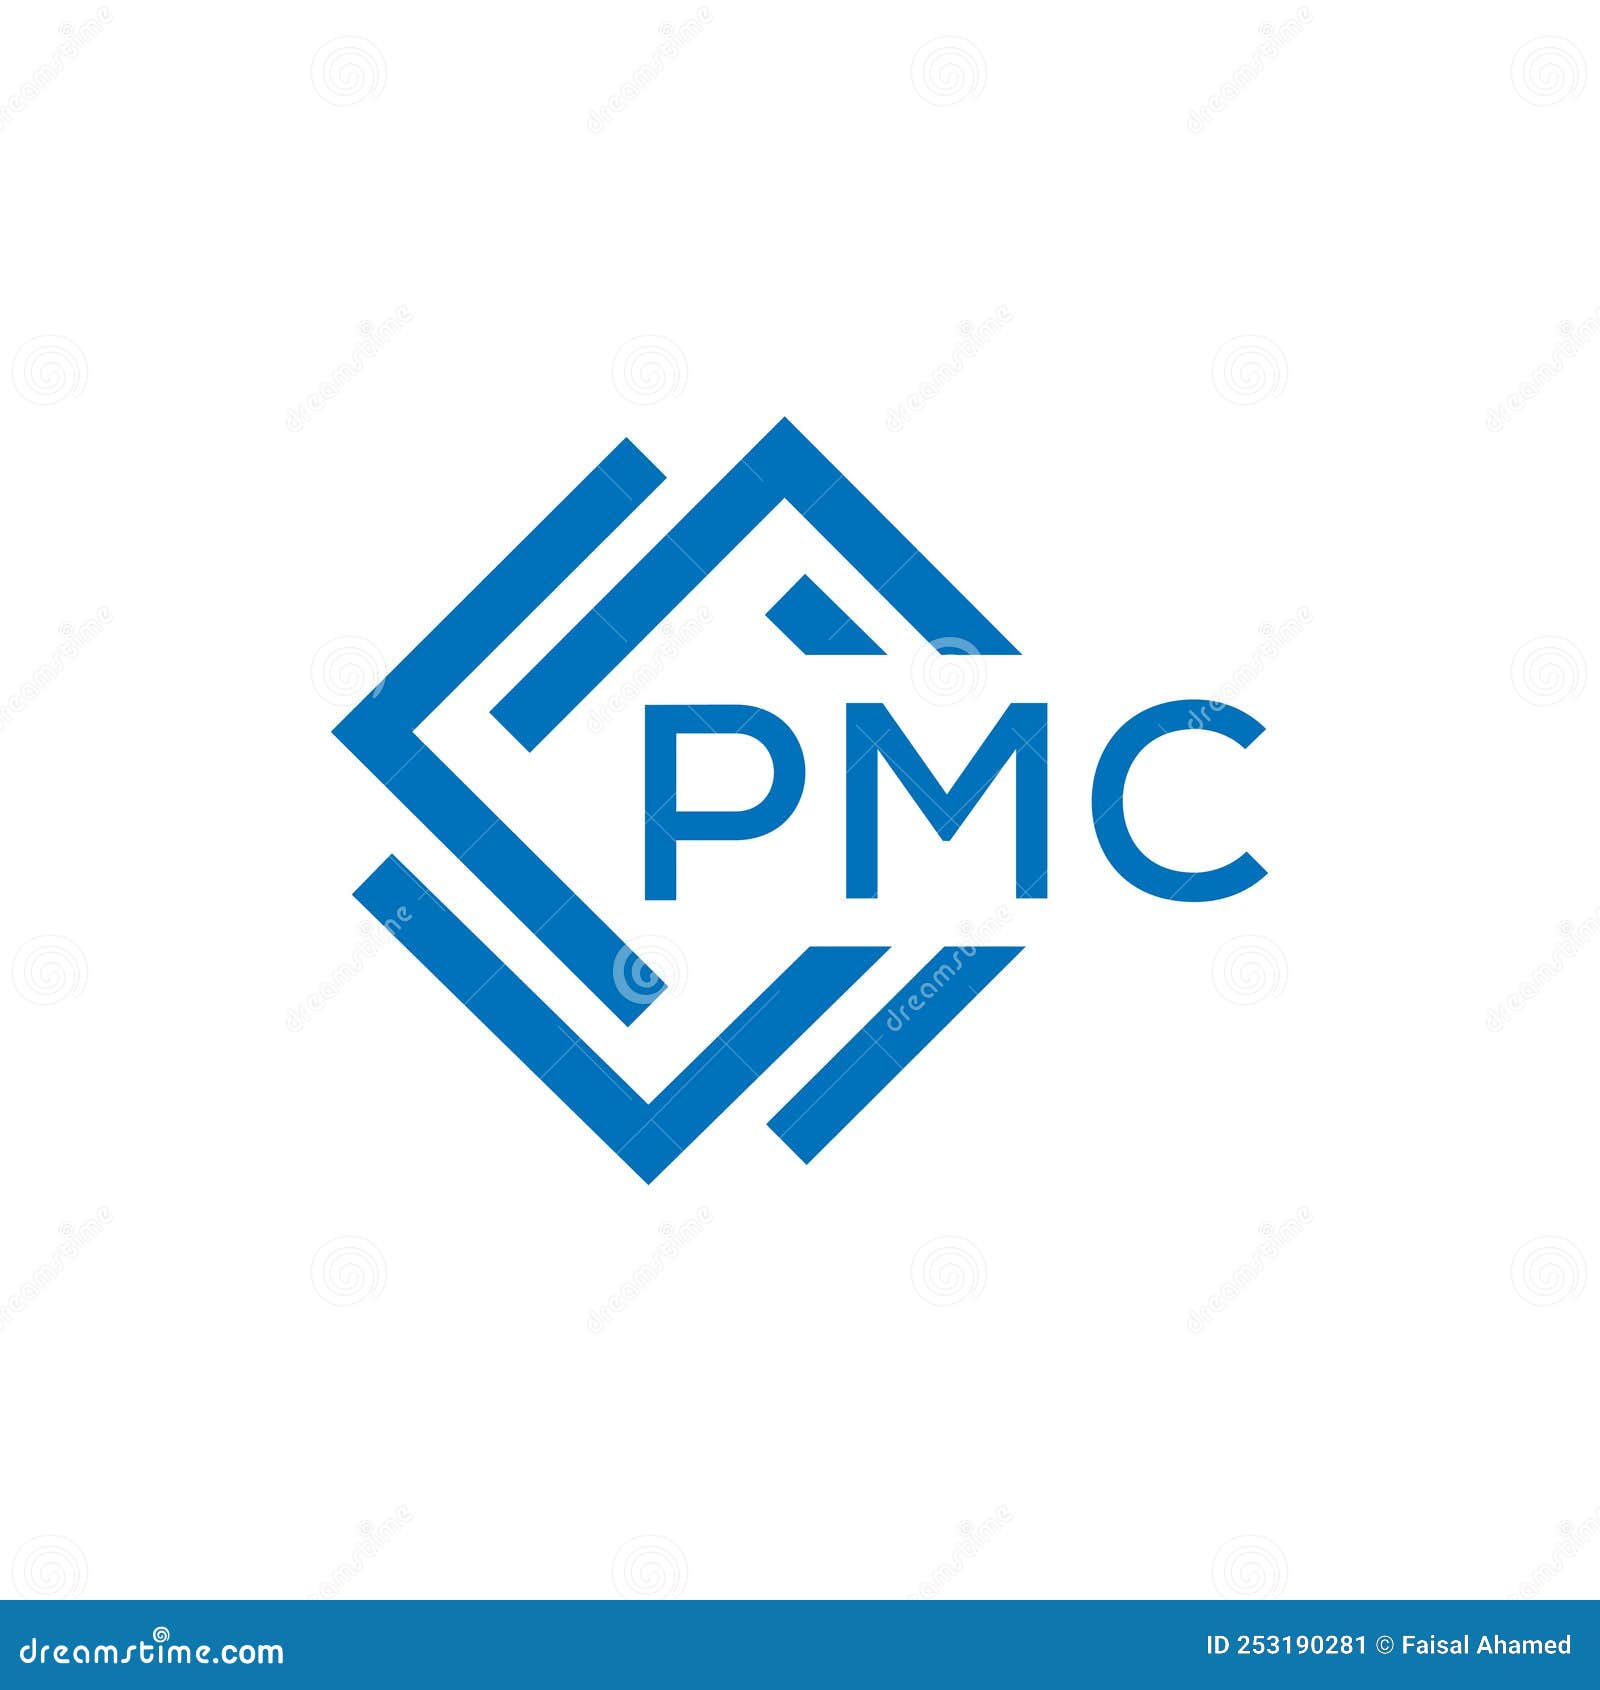 pmc letter logo  on white background. pmc creative circle letter logo